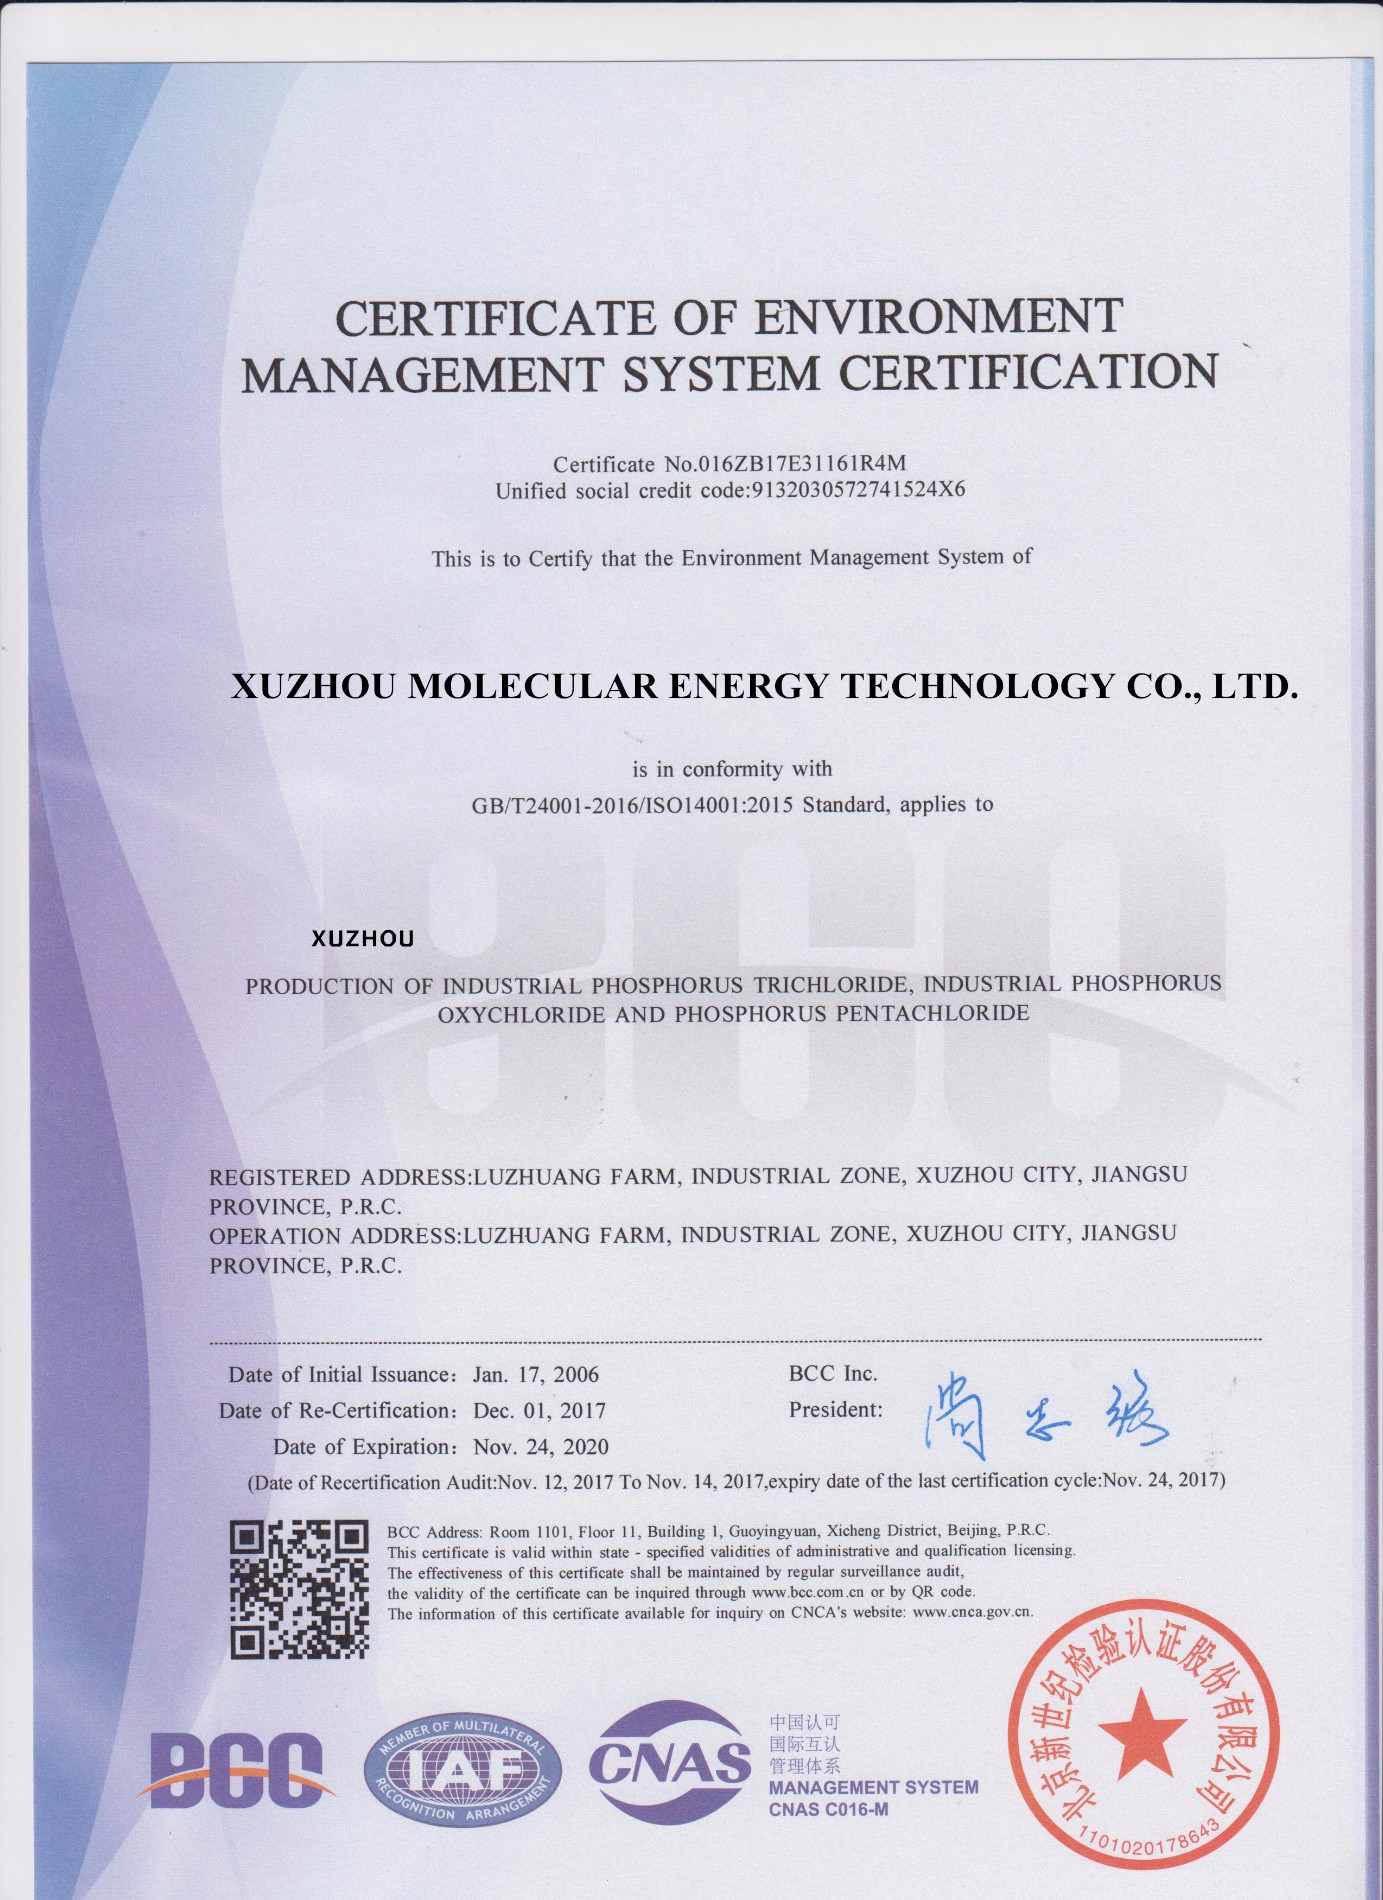 CERTIFICATE OF ENVIRONMENT MANAGEMENT SYSTEM CERTIFICATION